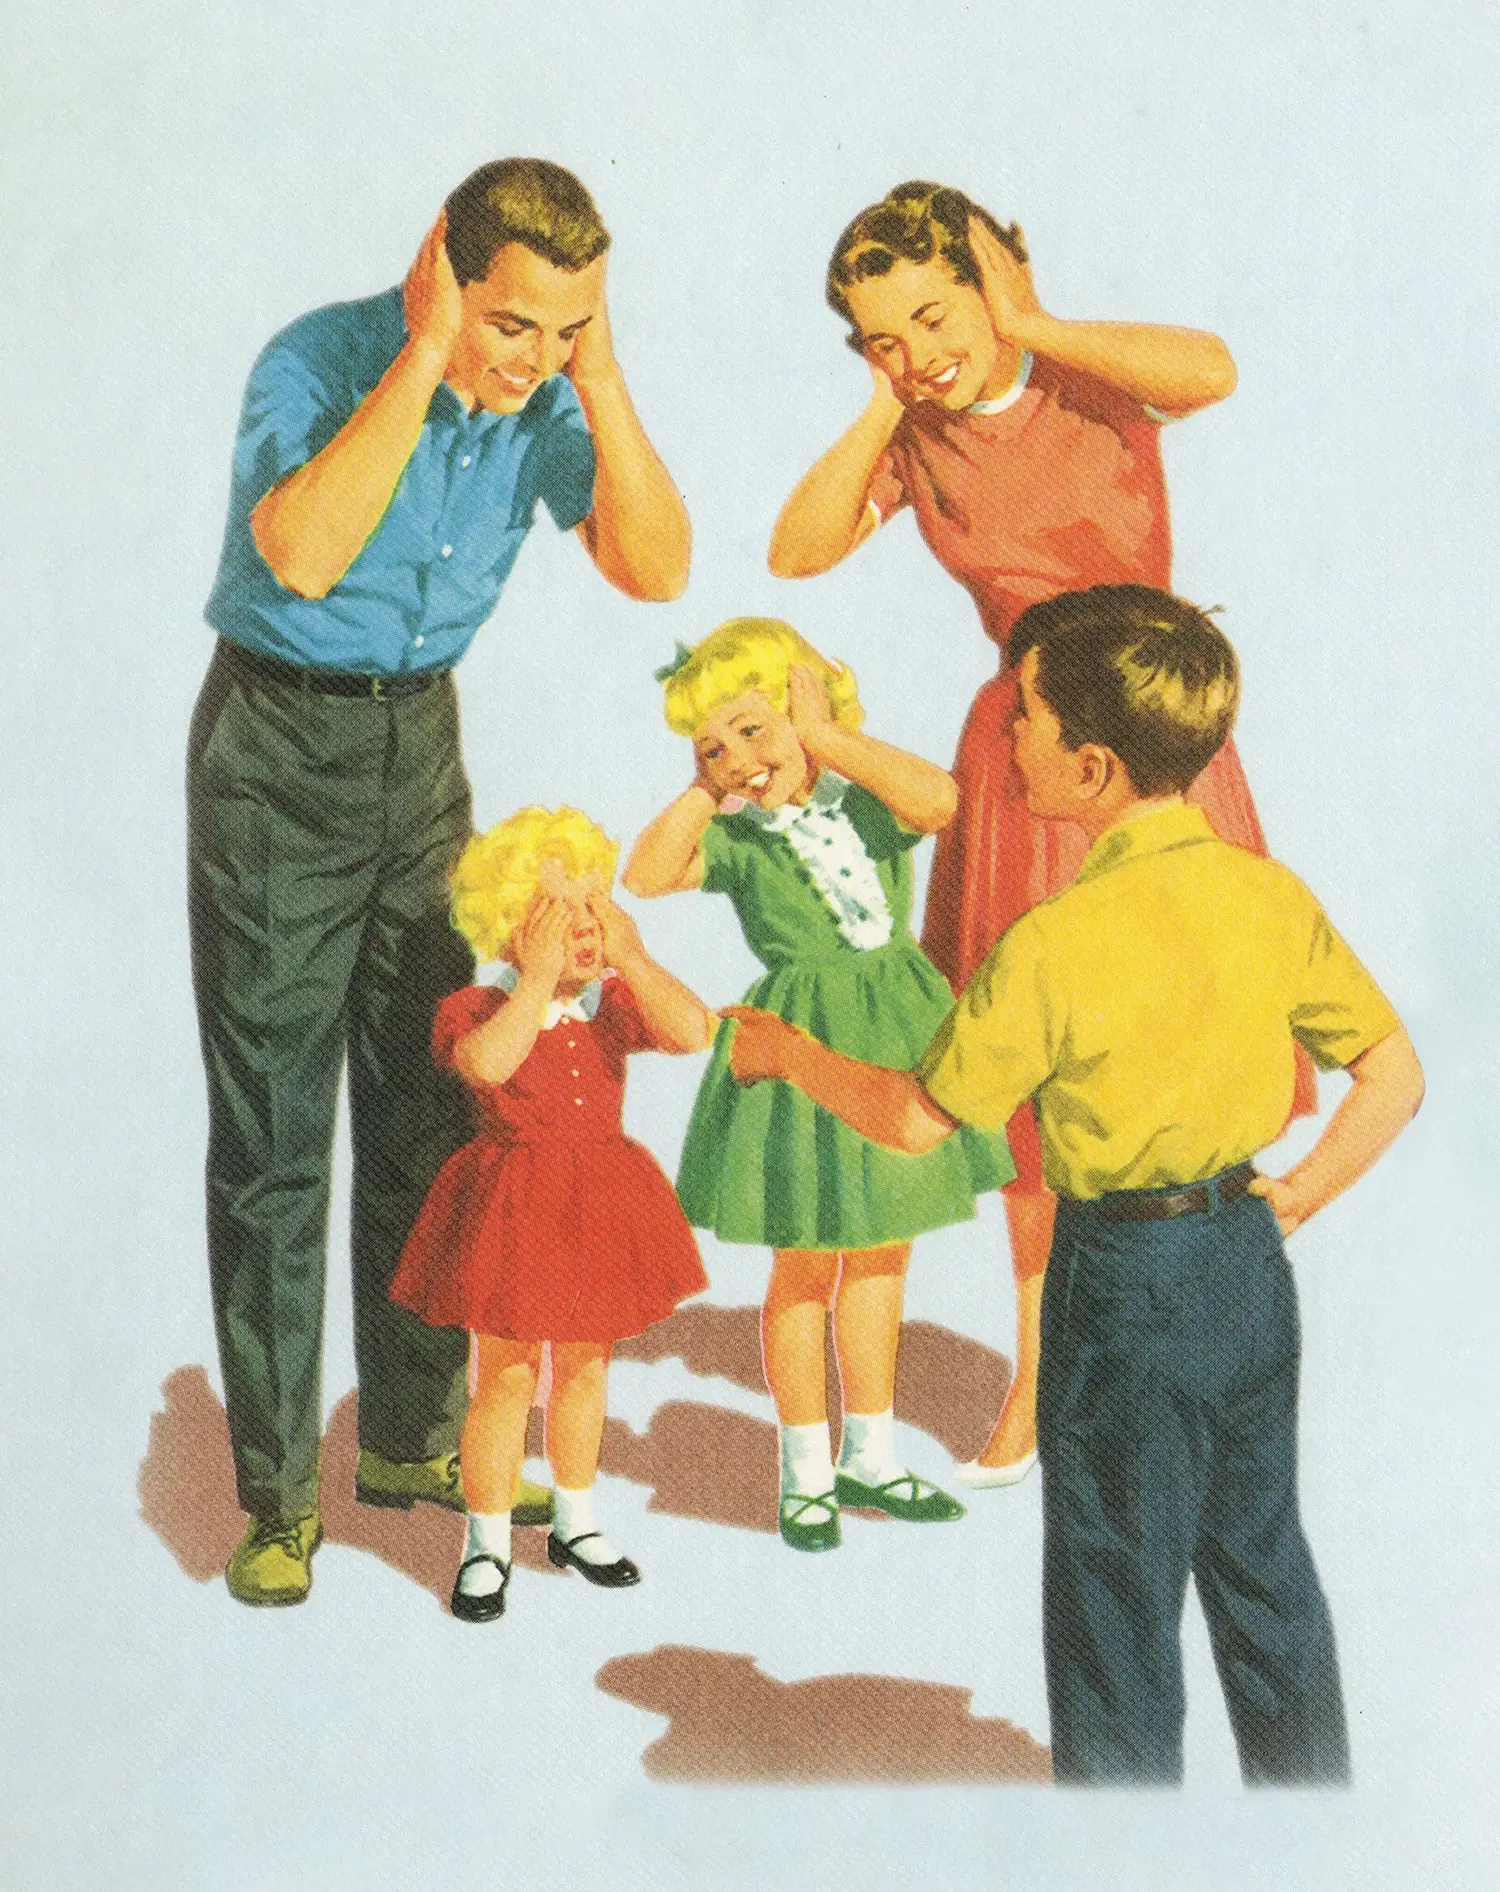 The Dick, Jane, and their three kids covering their eyes and ears.